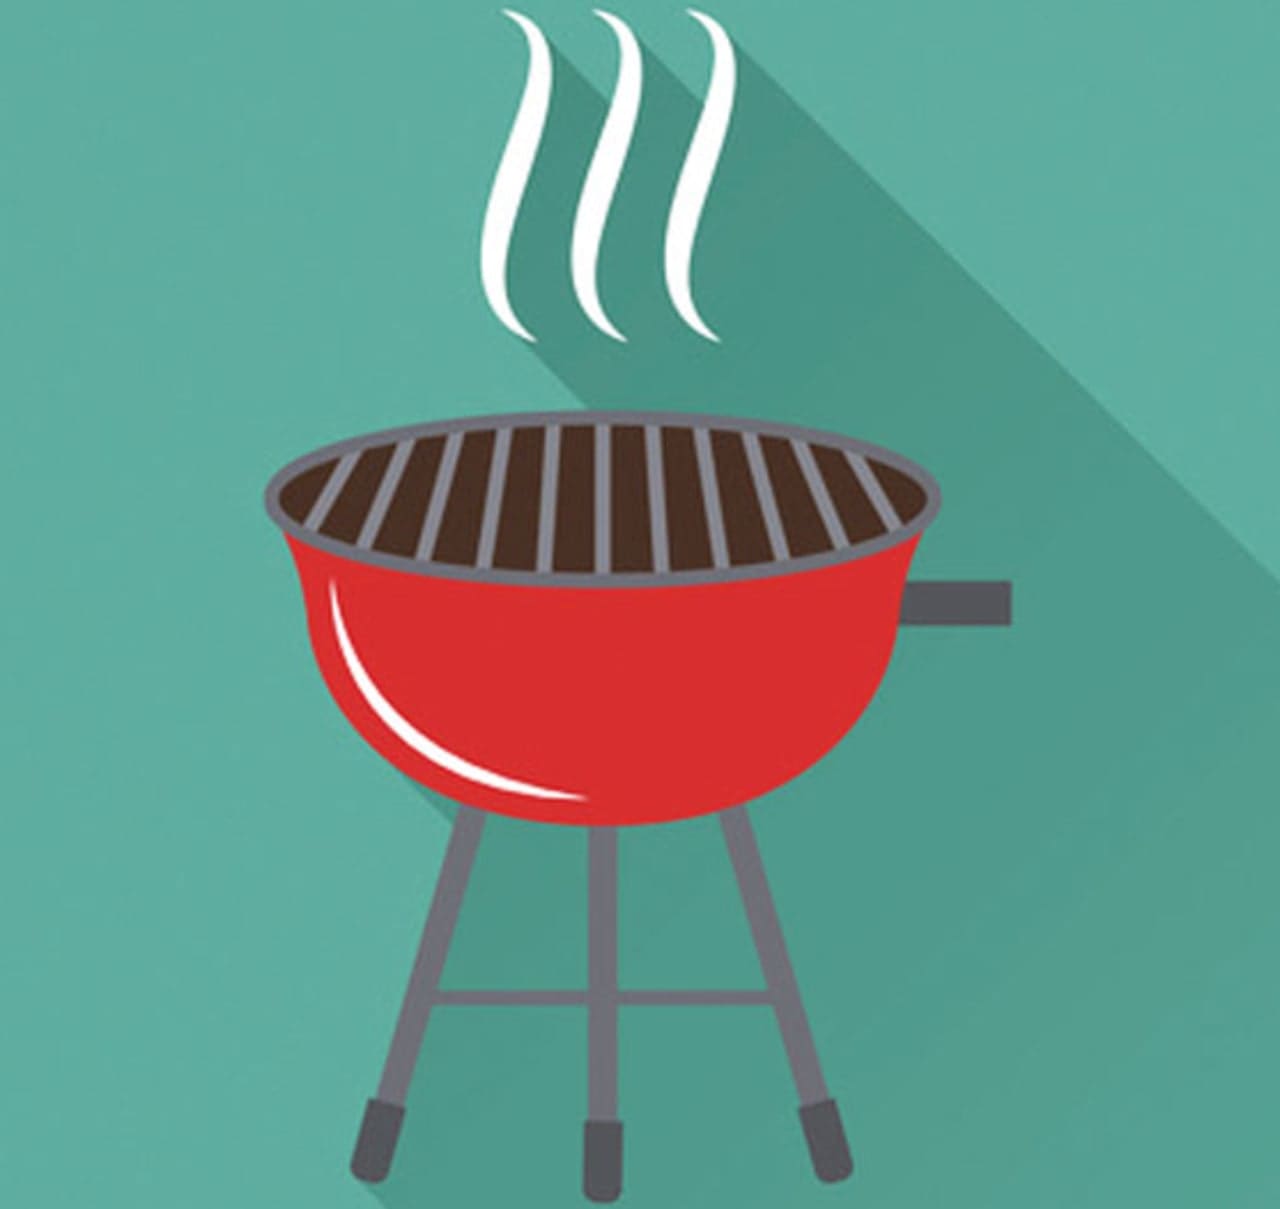 Grilling this summer? Make sure the only thing getting cooked is your food with tips from Westchester Medical Center.